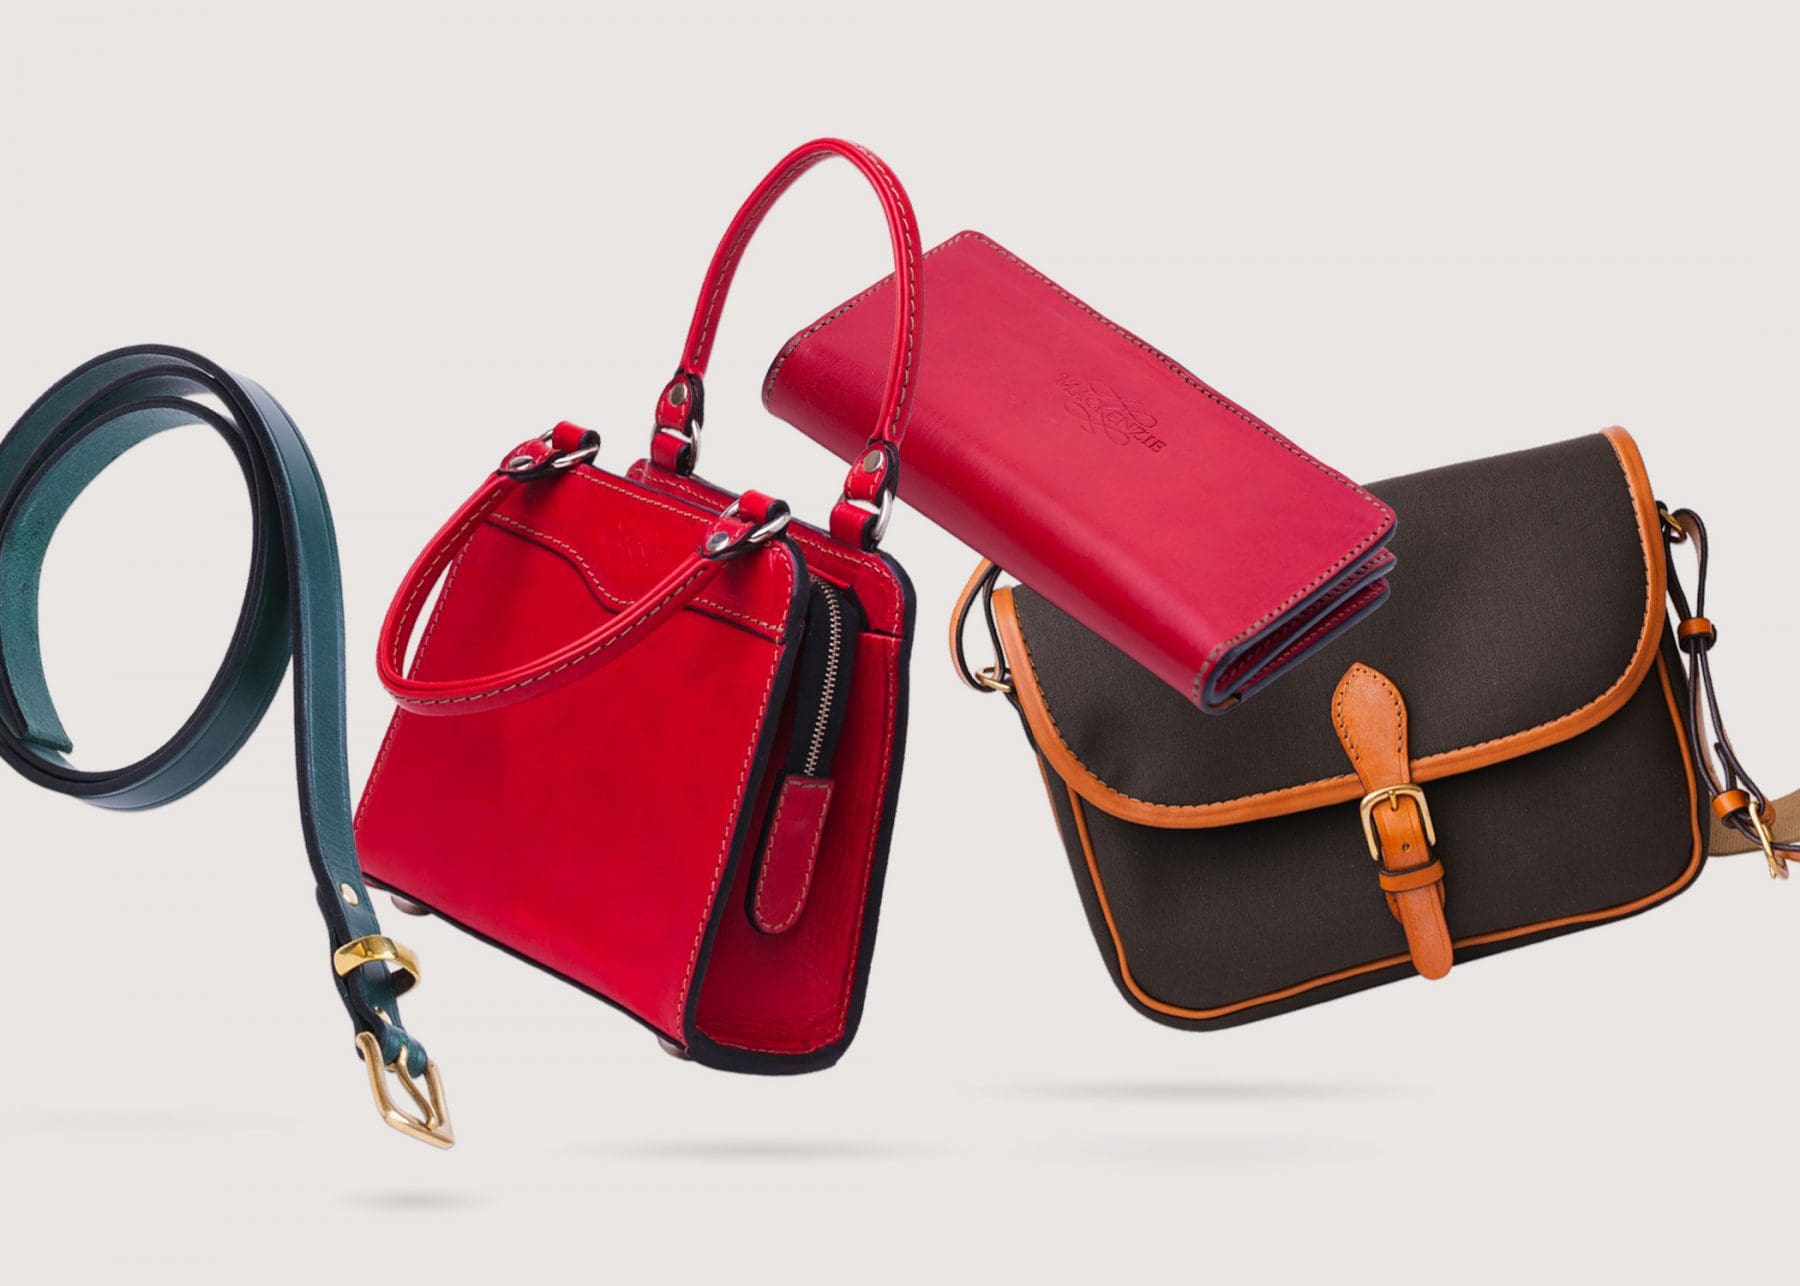 What To Wear With A Red Handbag - Zatchels' Top 5 Styling Tips